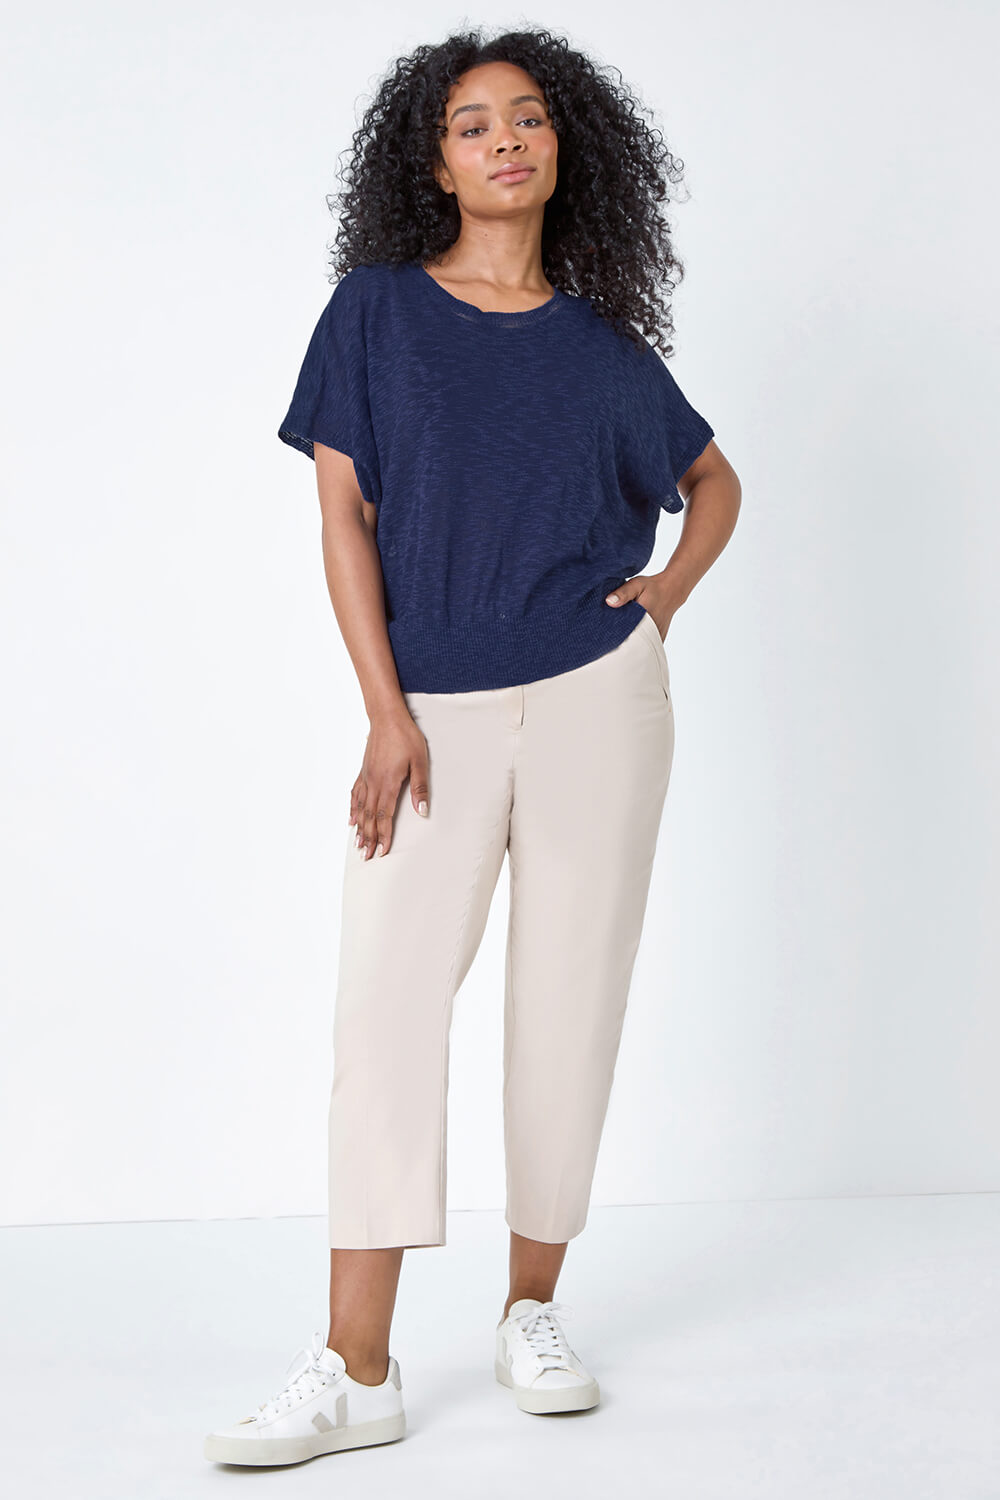 Navy  Petite Cotton Blend Textured Knit Top, Image 2 of 5